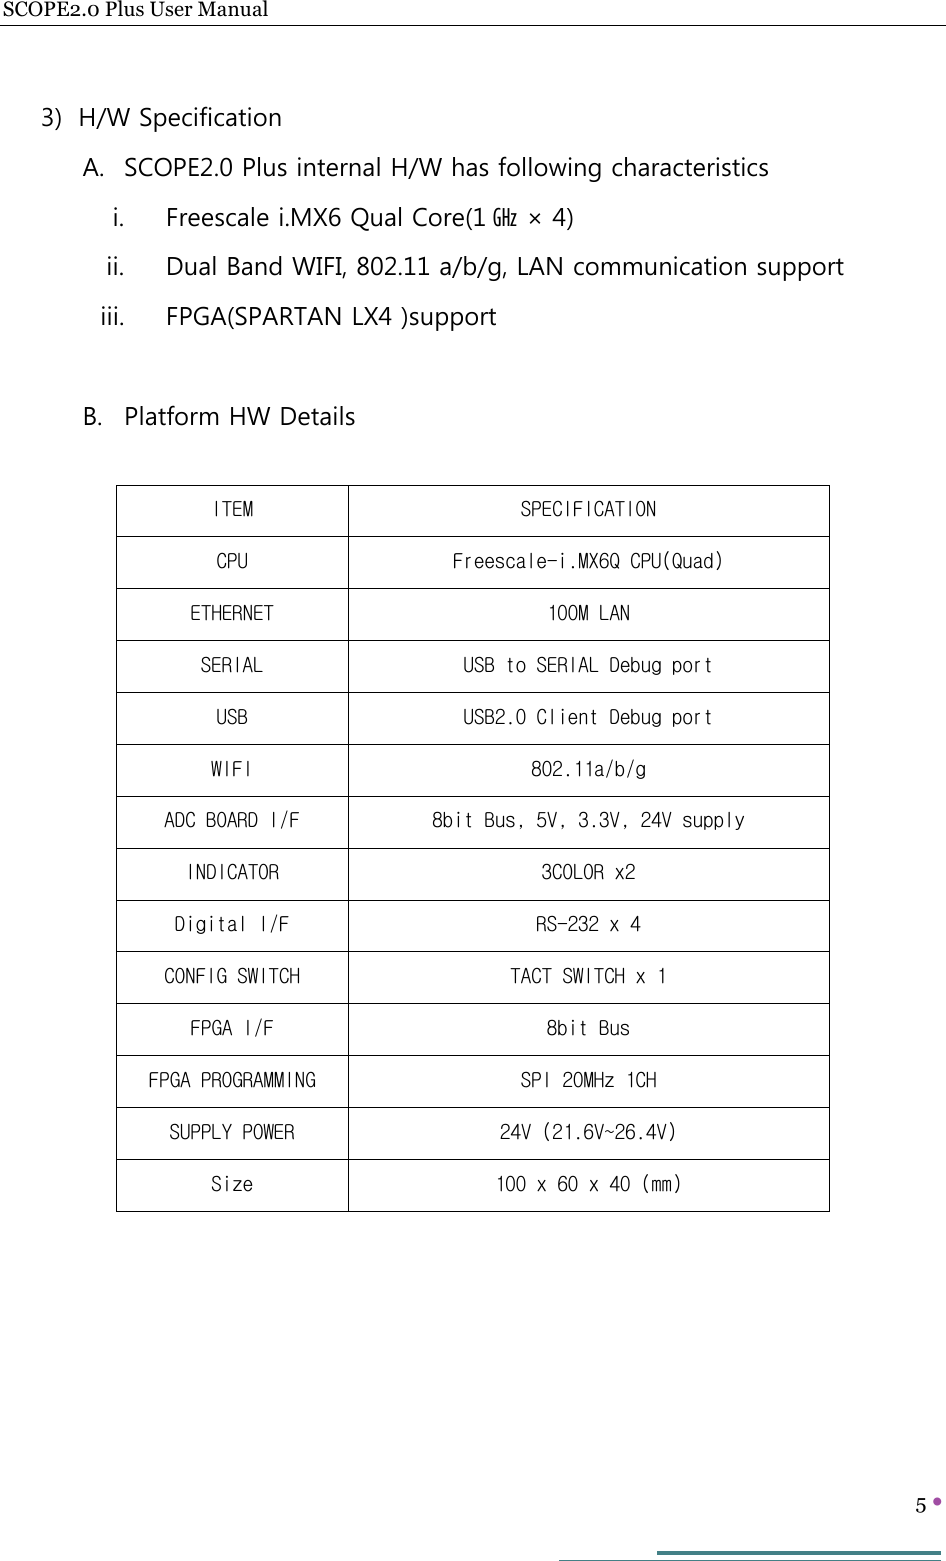 SCOPE2.0 Plus User Manual   5     3) H/W Specification A. SCOPE2.0 Plus internal H/W has following characteristics i. Freescale i.MX6 Qual Core(1 ㎓ × 4) ii. Dual Band WIFI, 802.11 a/b/g, LAN communication support iii. FPGA(SPARTAN LX4 )support  B. Platform HW Details               ITEM  SPECIFICATION CPU  Freescale-i.MX6Q CPU(Quad) ETHERNET  100M LAN SERIAL  USB to SERIAL Debug port USB  USB2.0 Client Debug port WIFI  802.11a/b/g ADC BOARD I/F  8bit Bus, 5V, 3.3V, 24V supply INDICATOR  3COLOR x2 Digital I/F  RS-232 x 4 CONFIG SWITCH  TACT SWITCH x 1 FPGA I/F  8bit Bus FPGA PROGRAMMING  SPI 20MHz 1CH SUPPLY POWER  24V (21.6V~26.4V) Size  100 x 60 x 40 (mm) 